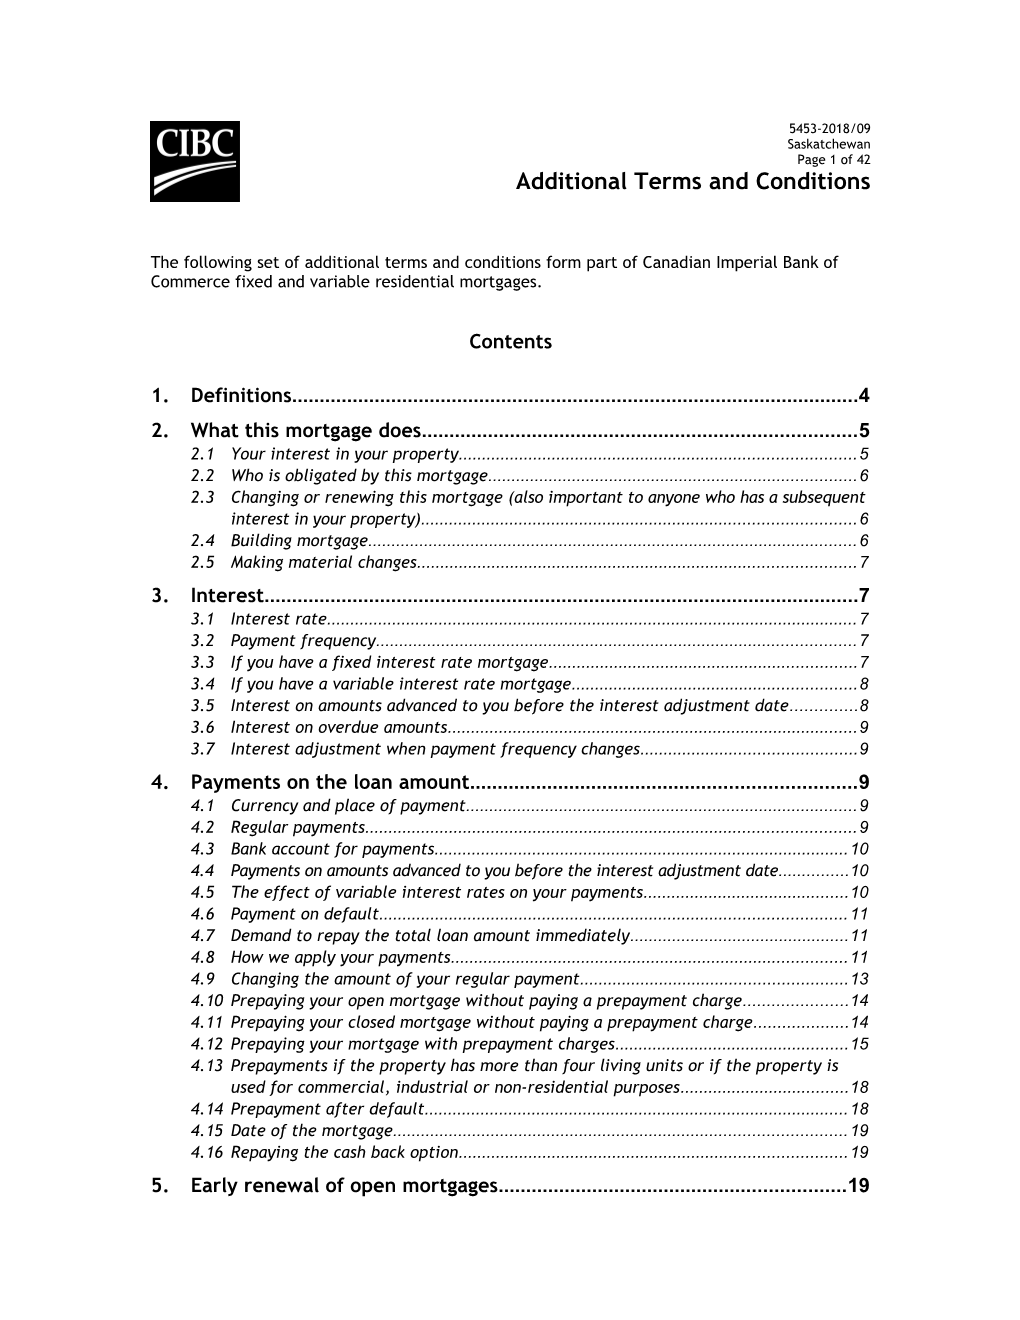 Additional Terms and Conditions (5453 Saskatchewan-2016/03)